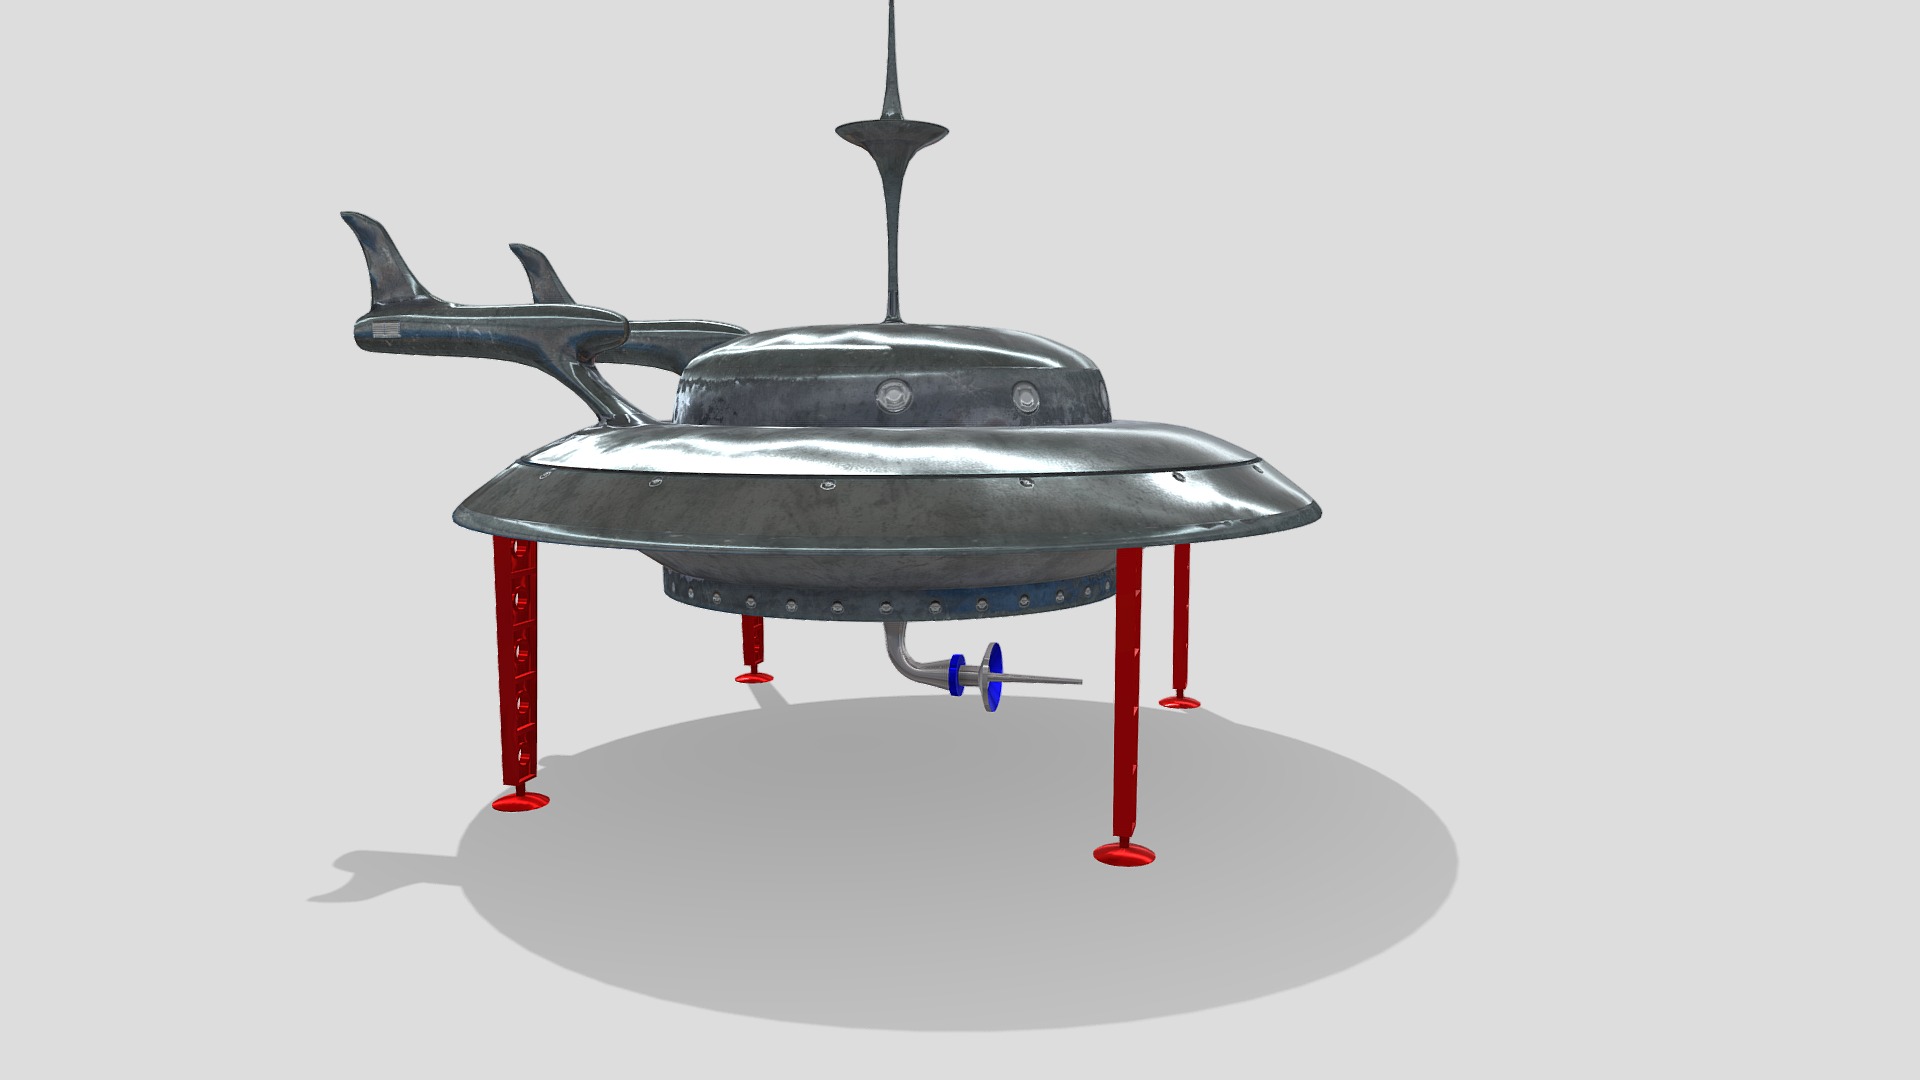 3D model Sci-fi Retro Flying Saucer - This is a 3D model of the Sci-fi Retro Flying Saucer. The 3D model is about a black and red barbecue.